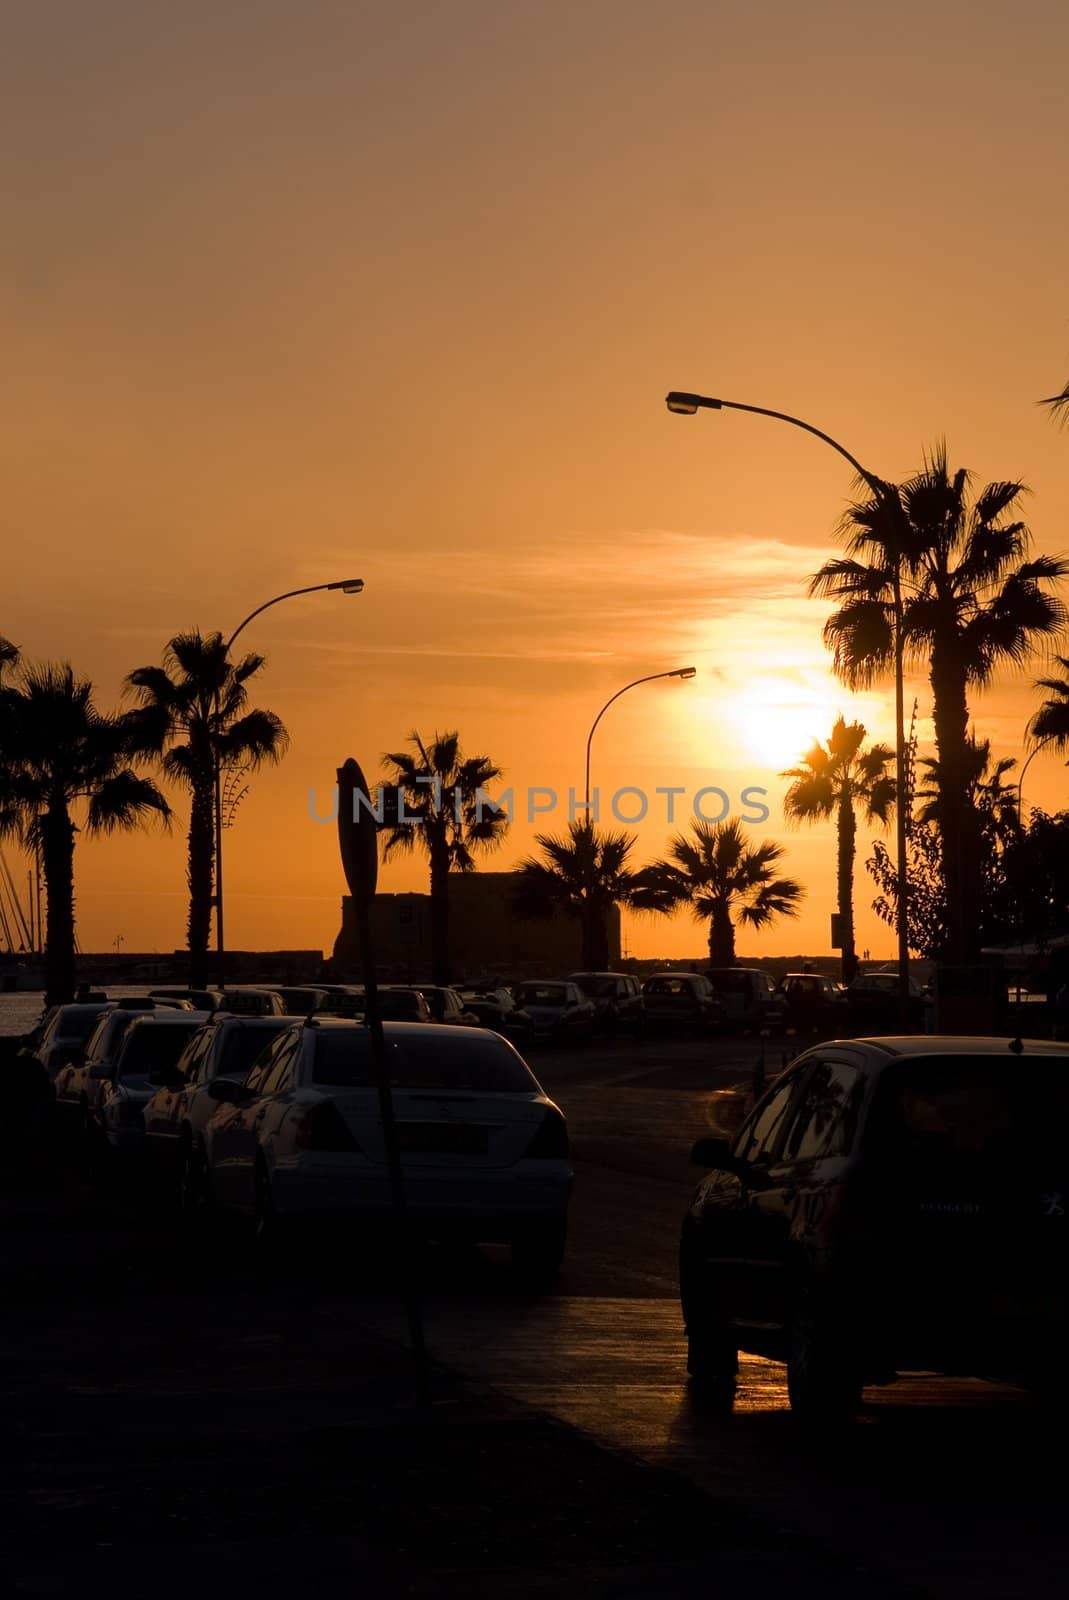 Yellow sunset with cars, palms and lampposts